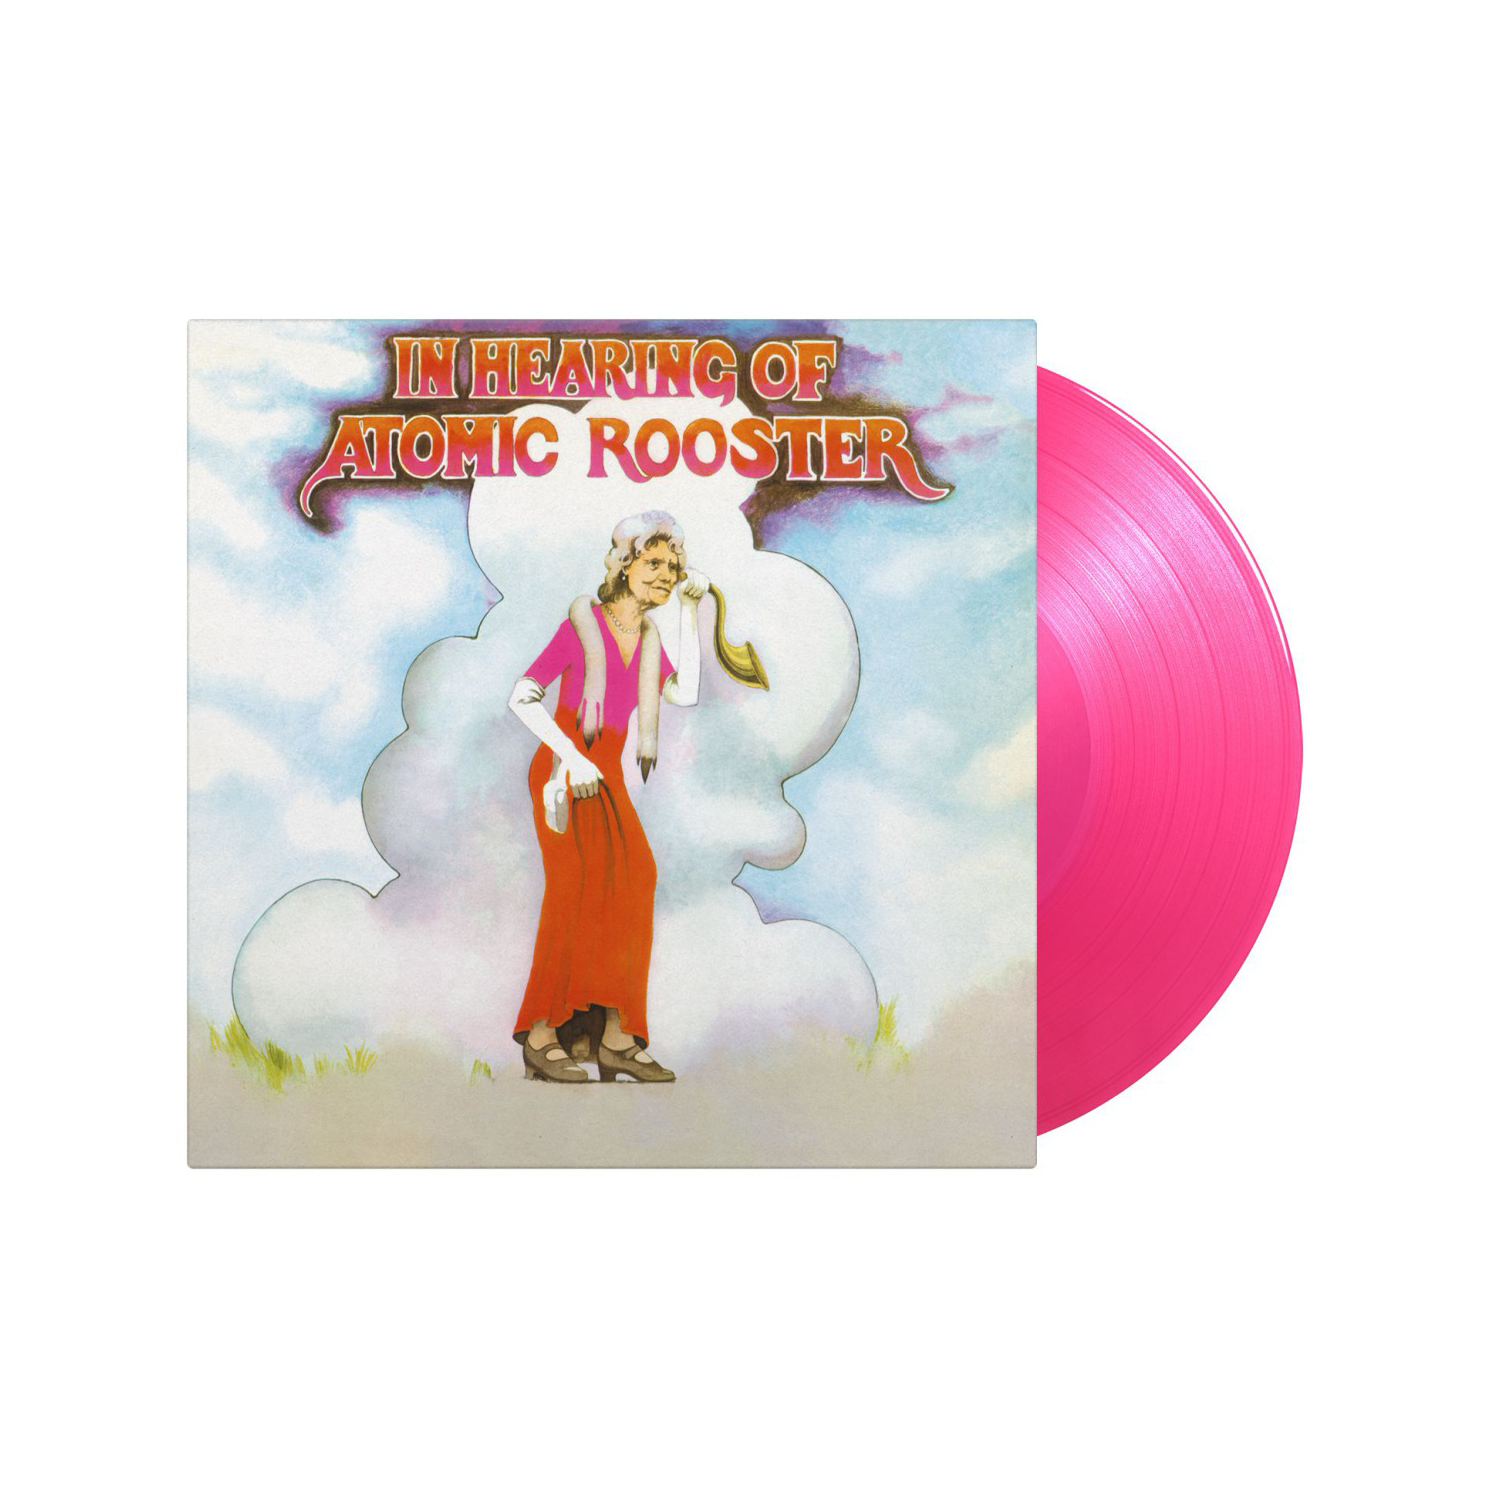 Atomic Rooster - In Hearing Of: Limited Translucent Magenta Vinyl LP